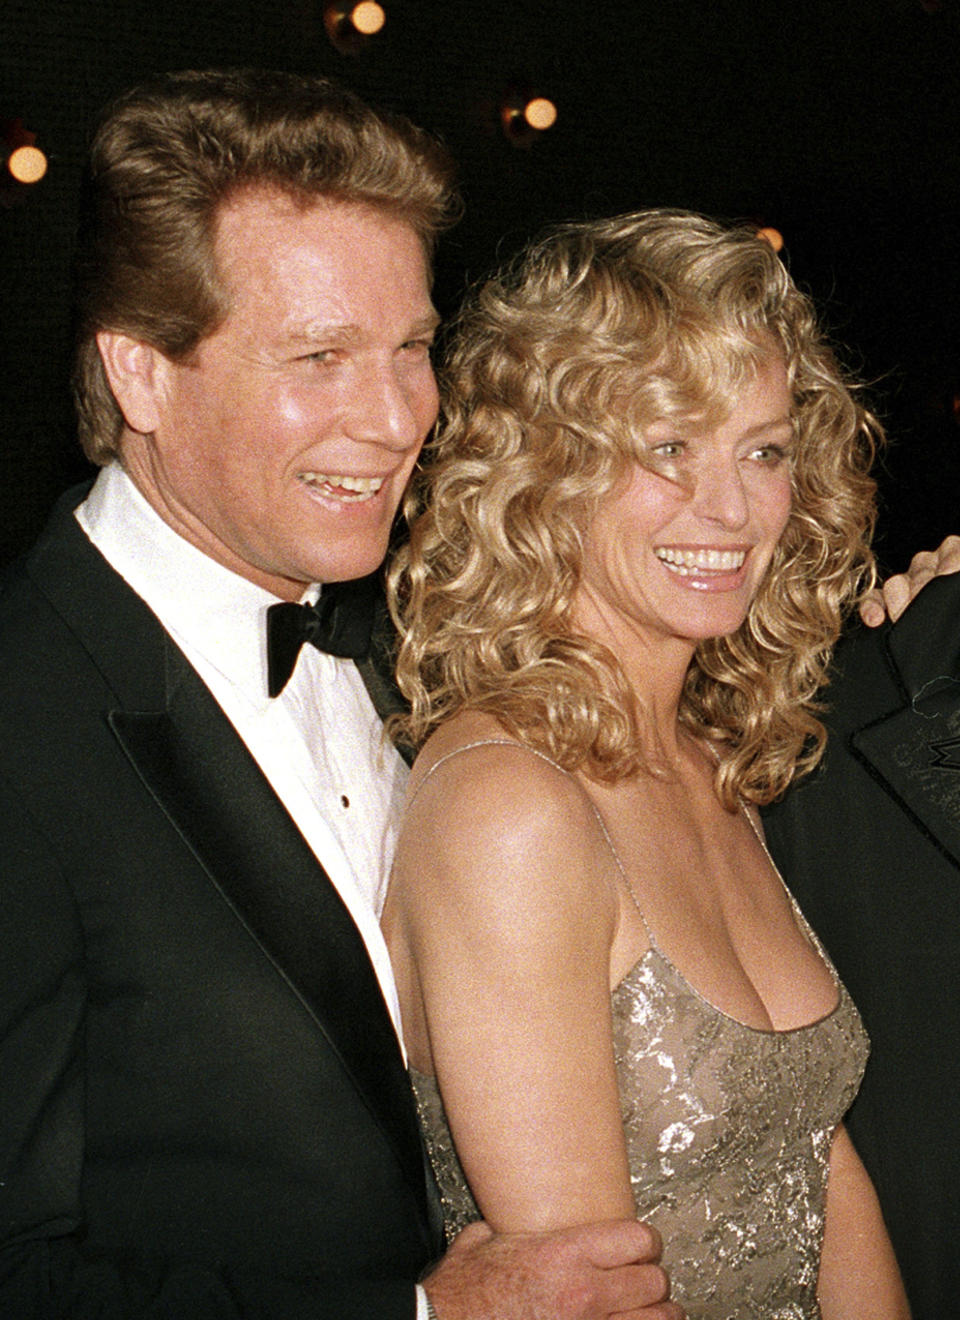 FILE - Actors Ryan O'Neal, left, and Farrah Fawcett are shown at the premiere of the film. "Chances Are," March 5, 1989, in New York. O’Neal, who was nominated for an Oscar for the tear-jerker “Love Story” and played opposite his precocious daughter Tatum in “Paper Moon,” has died. O’Neal's son Patrick said on Instagram that his father died Friday, Dec. 8, 2023. (AP Photo/Ray Stubblebine, File)